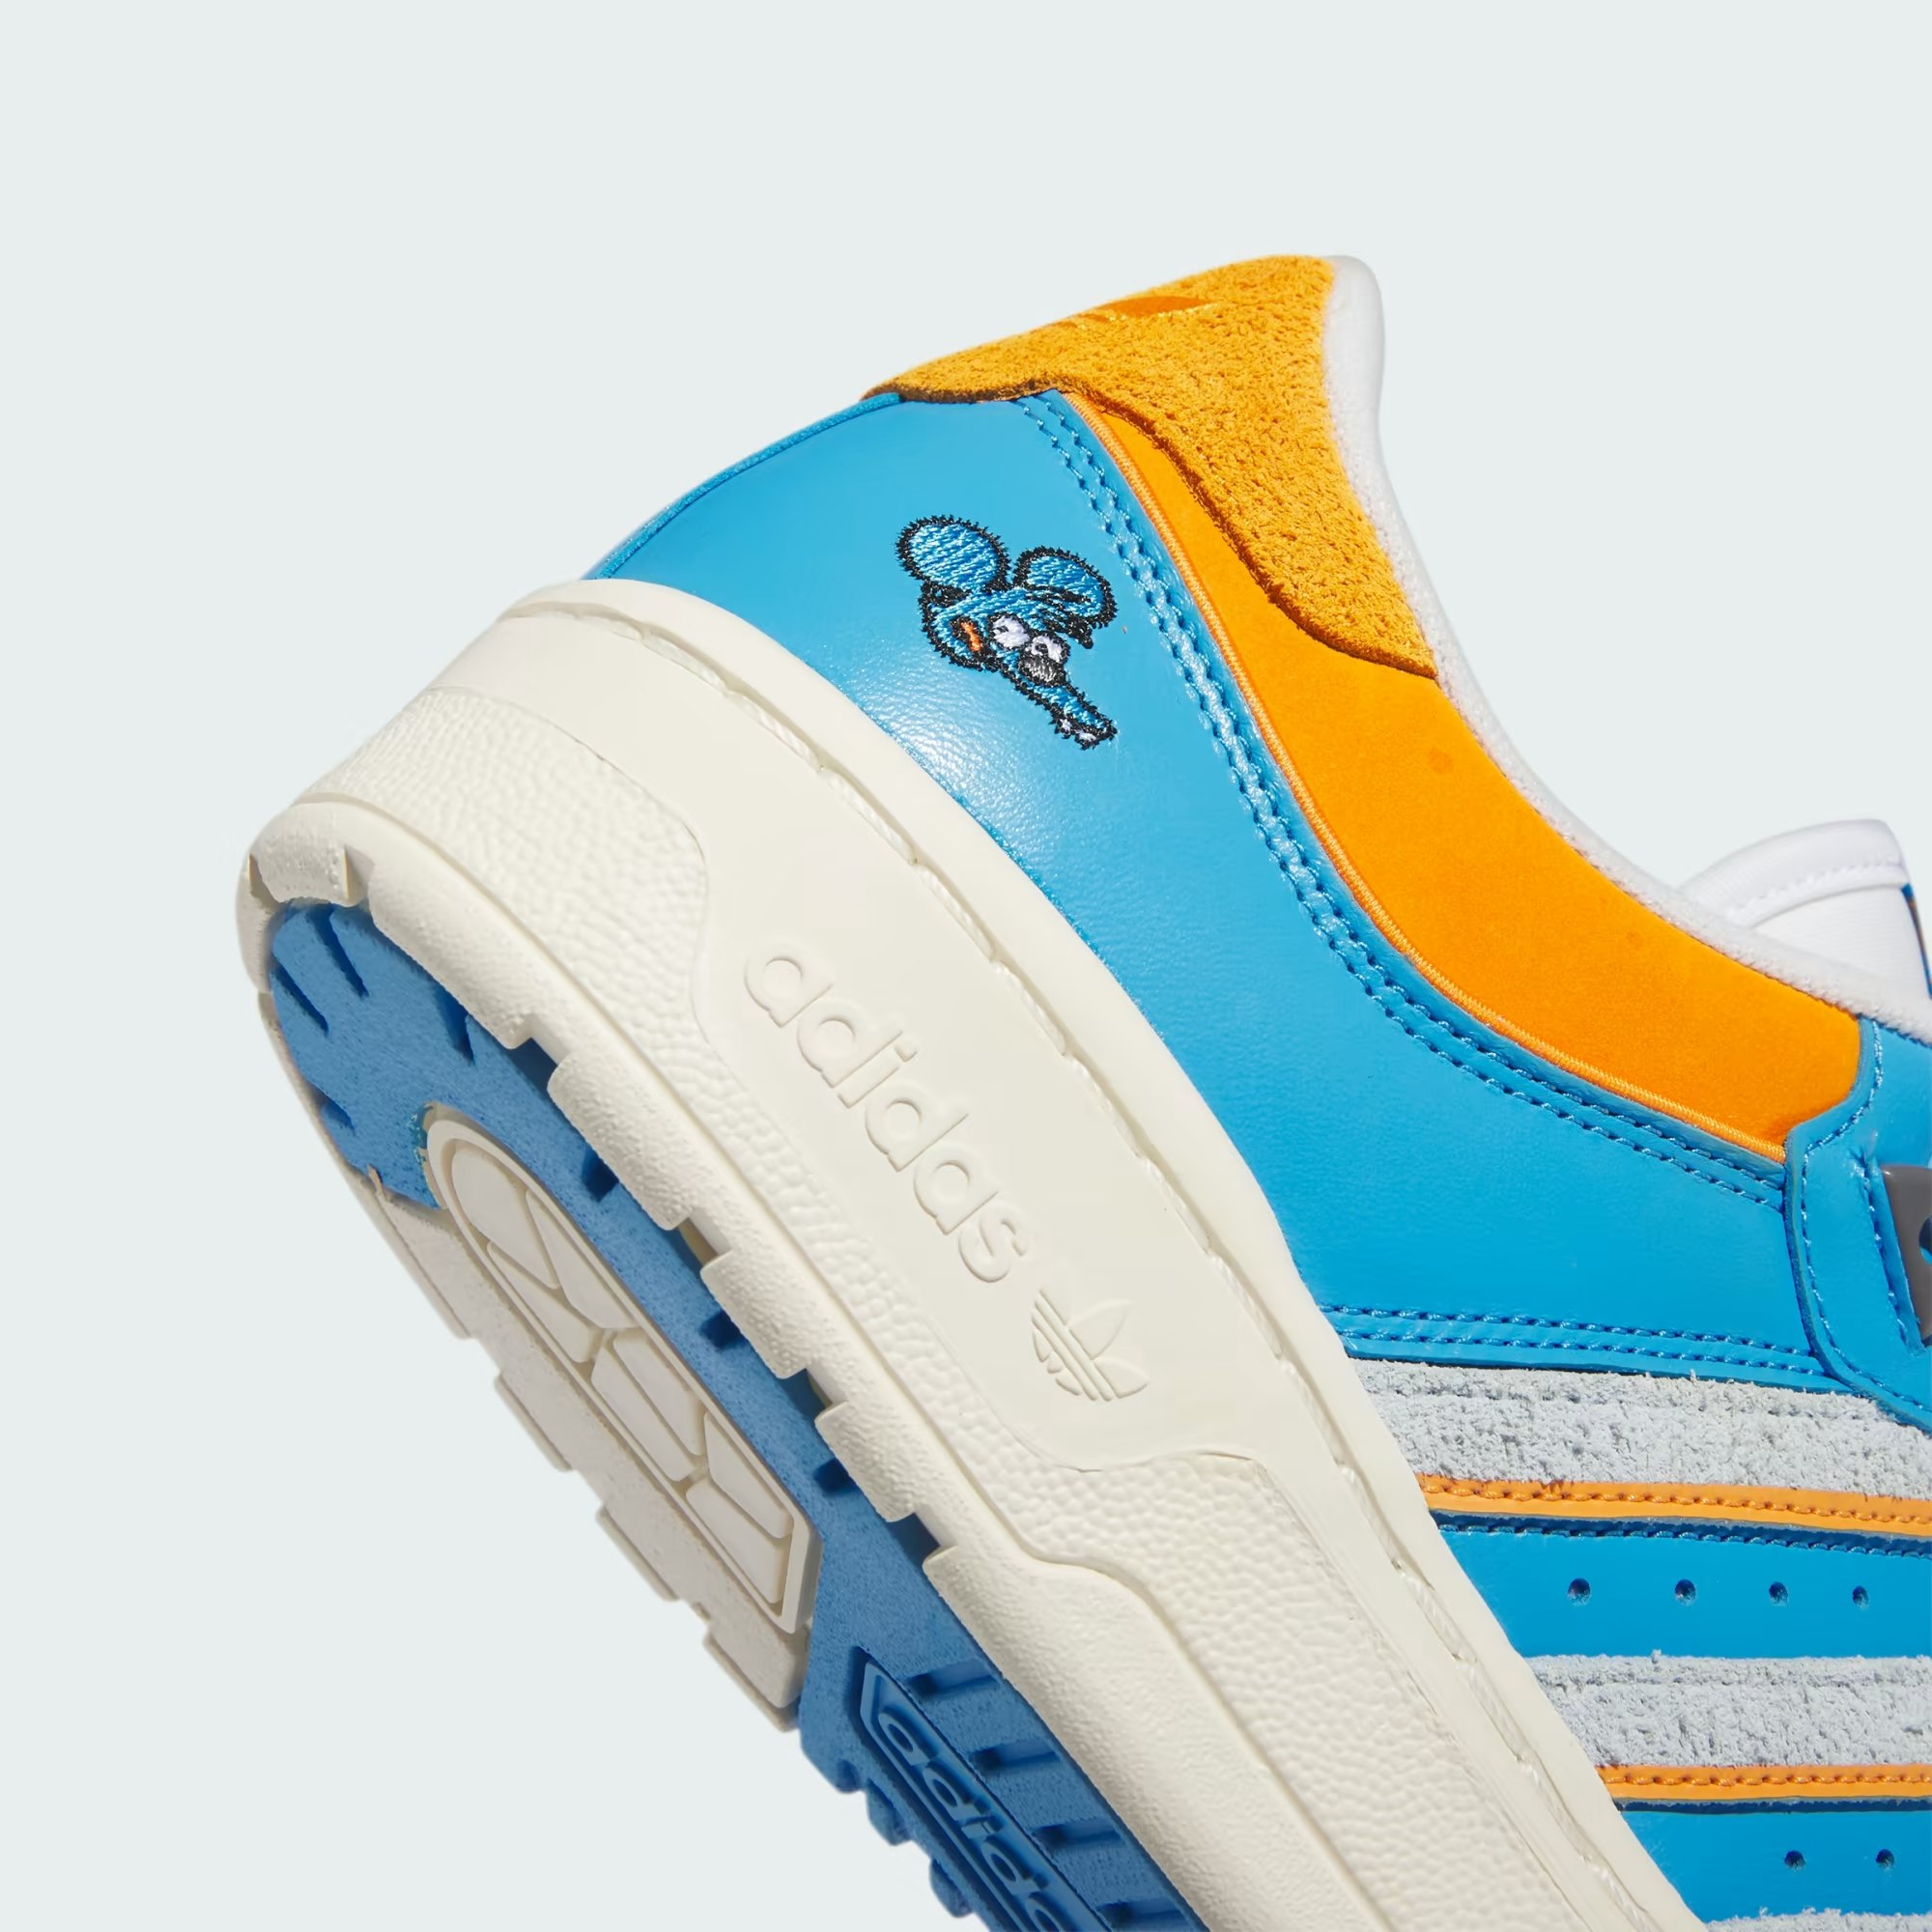 The Simpsons x adidas Rivalry Low "Itchy"